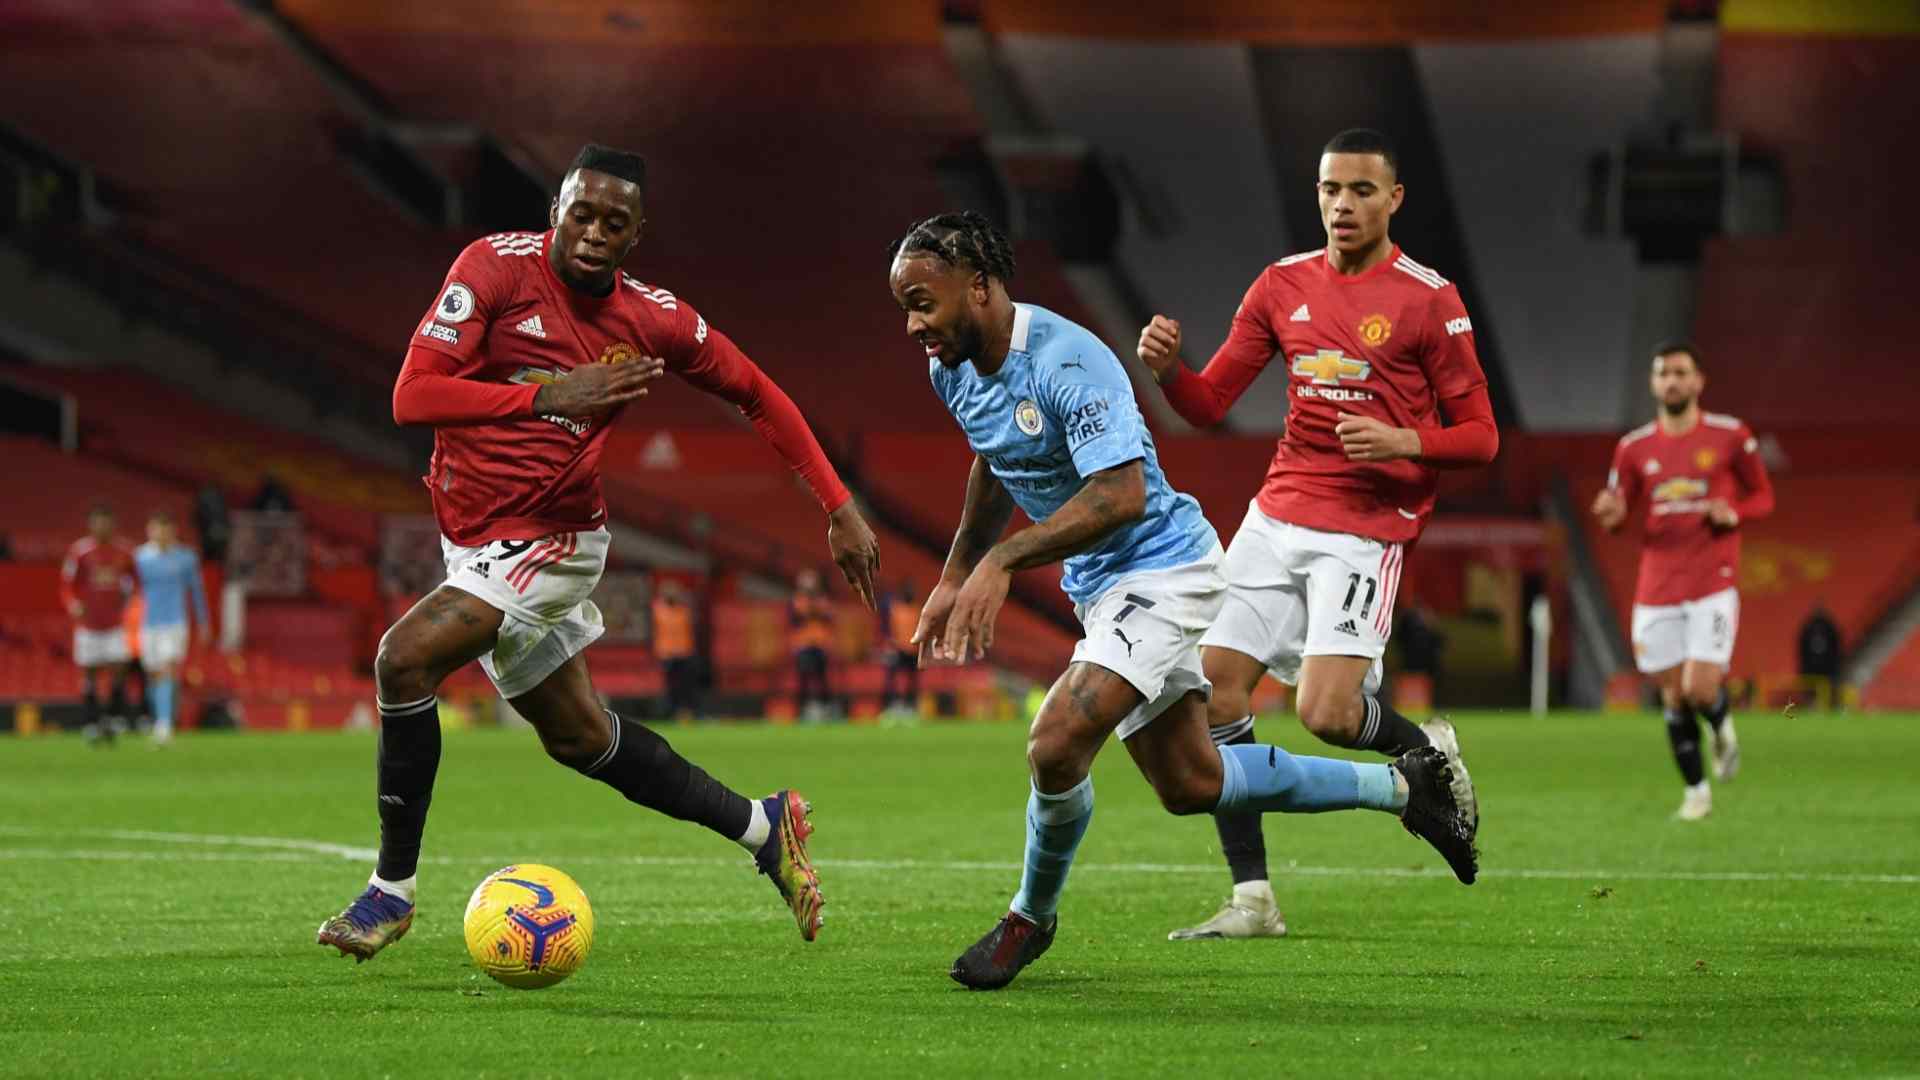 Complete Match Preview: Manchester City vs Manchester United